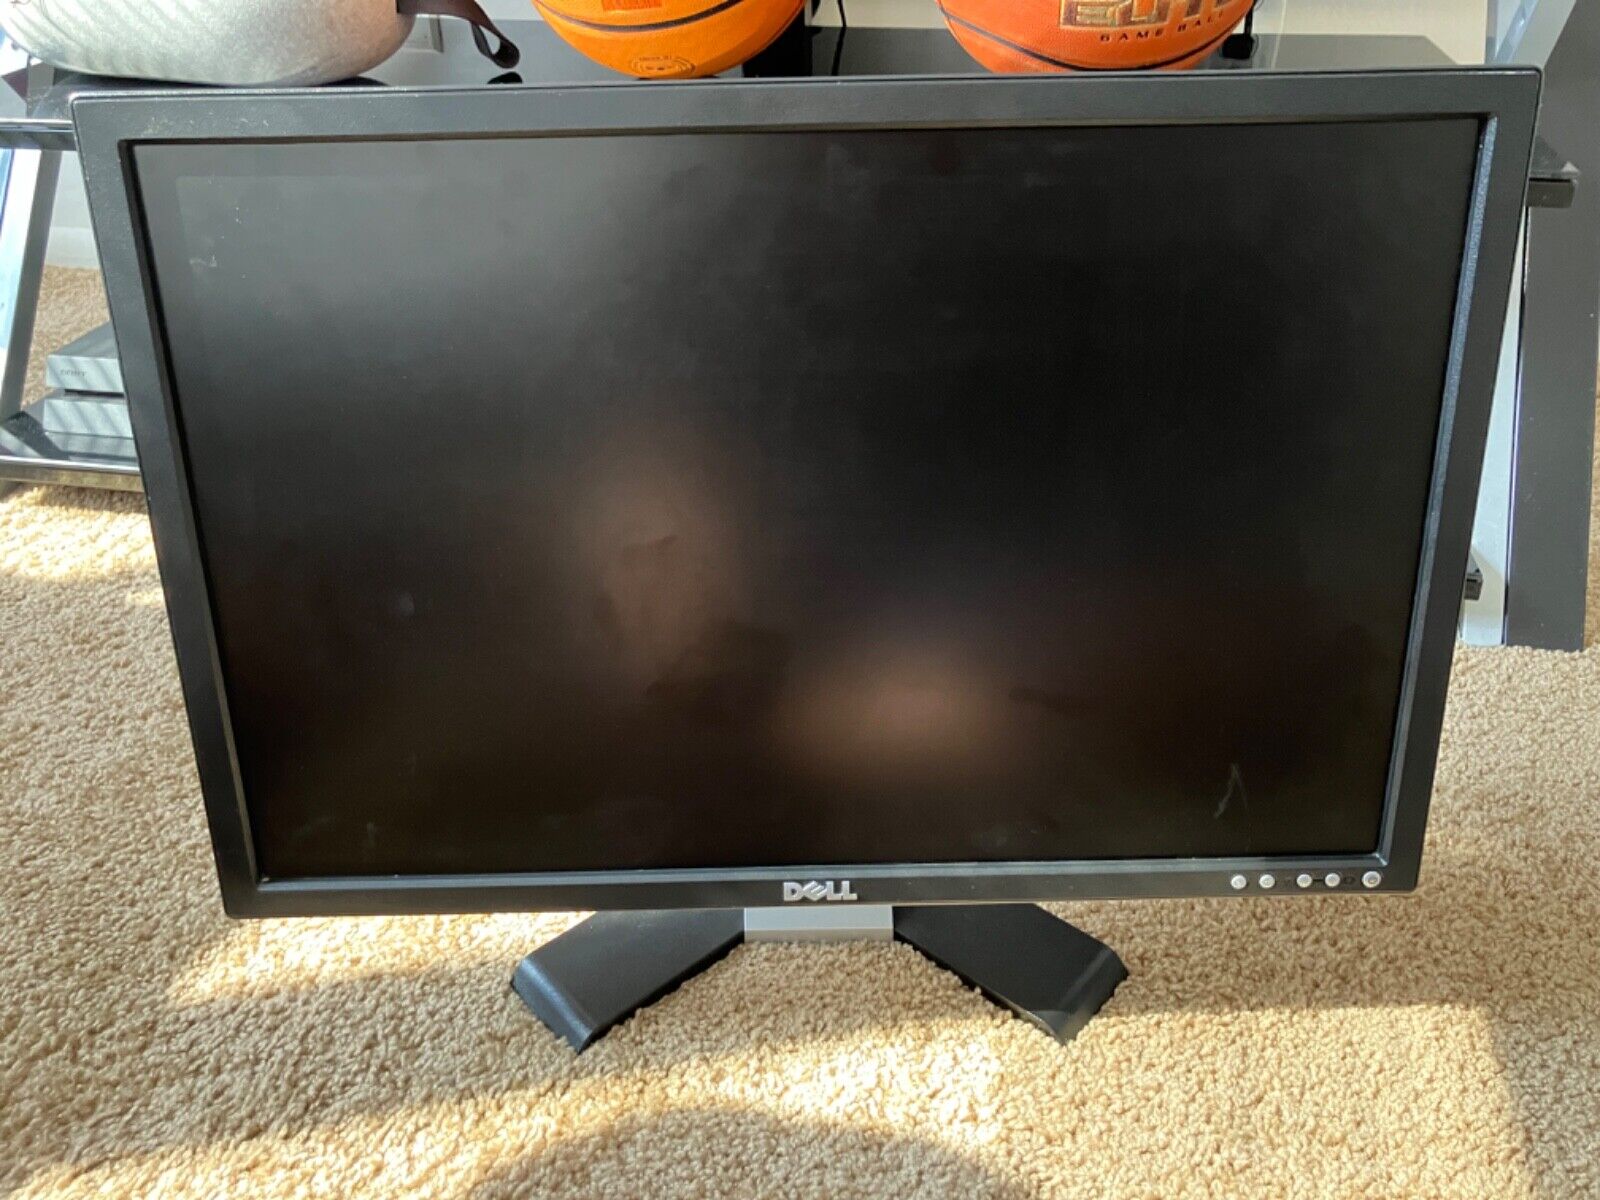 Dell 22inch Widescreen LCD Monitor, Black, Very Good Condition, Works Good.